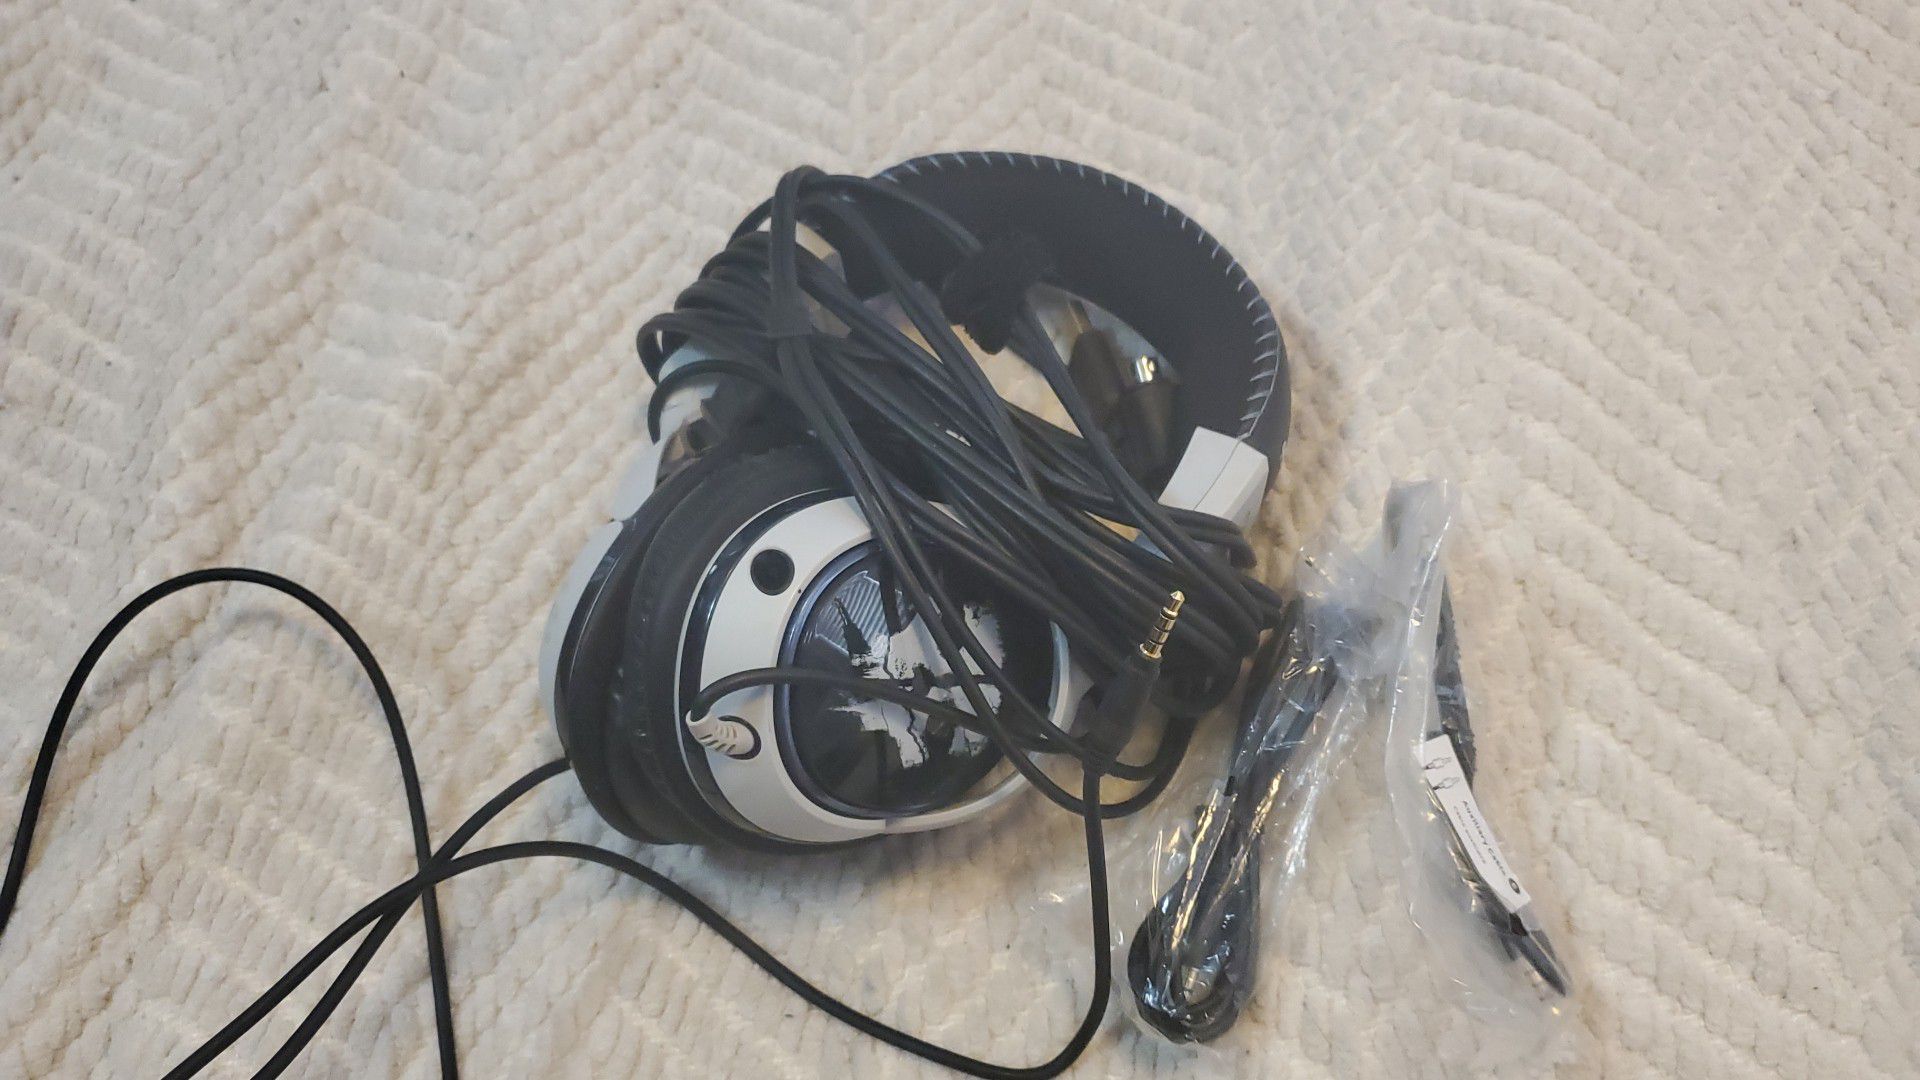 Call of duty ghost turtle beach headset